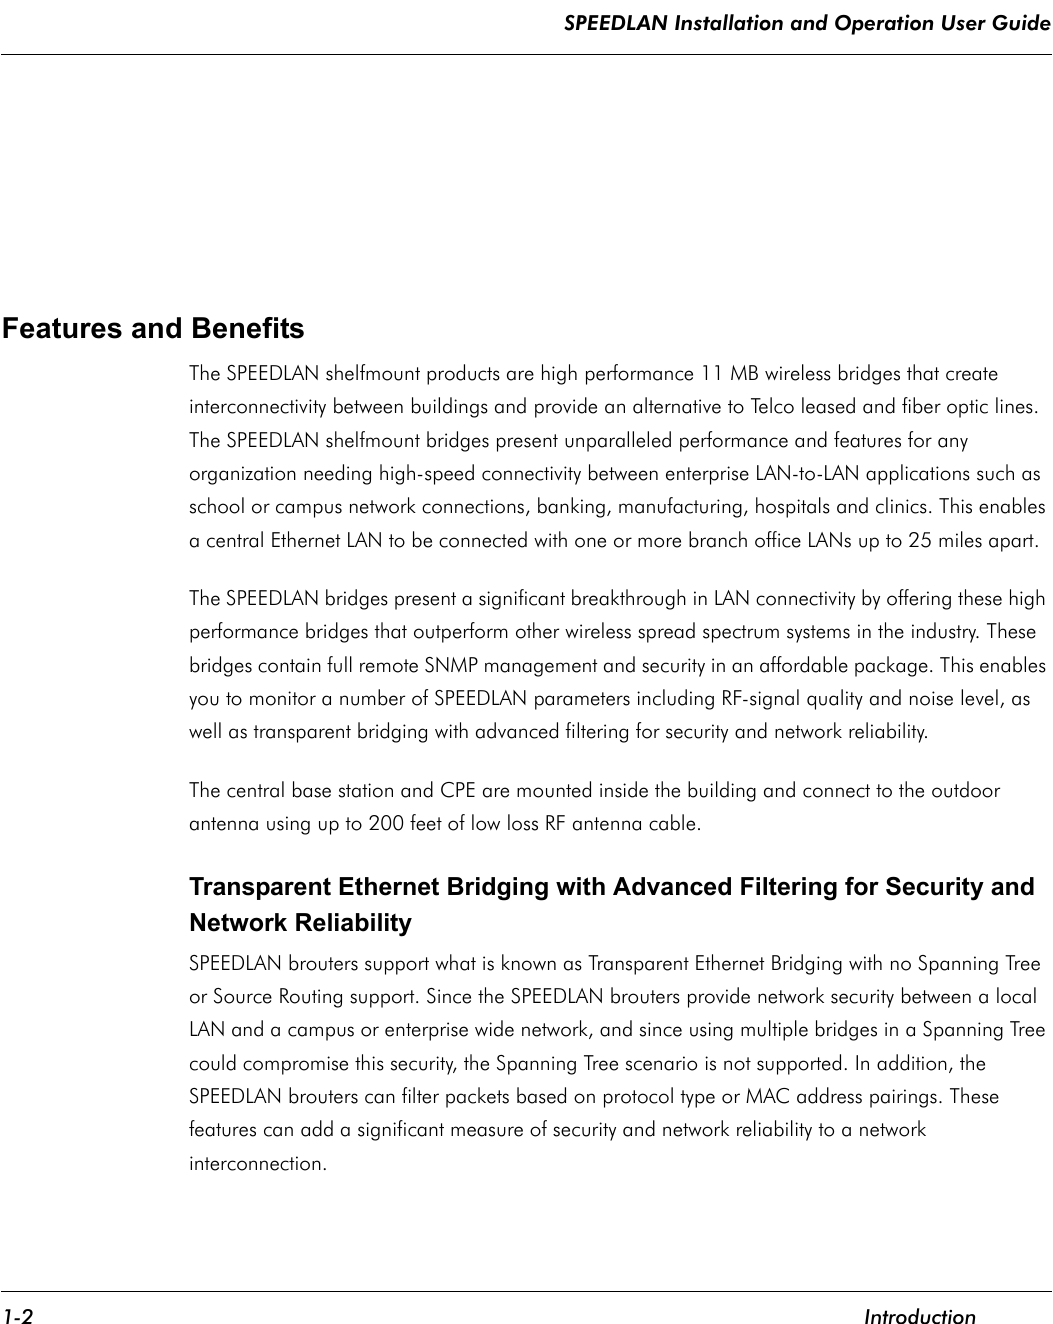 SPEEDLAN Installation and Operation User Guide 1-2 IntroductionFeatures and Benefits The SPEEDLAN shelfmount products are high performance 11 MB wireless bridges that create interconnectivity between buildings and provide an alternative to Telco leased and fiber optic lines. The SPEEDLAN shelfmount bridges present unparalleled performance and features for any organization needing high-speed connectivity between enterprise LAN-to-LAN applications such as school or campus network connections, banking, manufacturing, hospitals and clinics. This enables a central Ethernet LAN to be connected with one or more branch office LANs up to 25 miles apart.  The SPEEDLAN bridges present a significant breakthrough in LAN connectivity by offering these high performance bridges that outperform other wireless spread spectrum systems in the industry. These bridges contain full remote SNMP management and security in an affordable package. This enables you to monitor a number of SPEEDLAN parameters including RF-signal quality and noise level, as well as transparent bridging with advanced filtering for security and network reliability.The central base station and CPE are mounted inside the building and connect to the outdoor antenna using up to 200 feet of low loss RF antenna cable.     Transparent Ethernet Bridging with Advanced Filtering for Security and Network Reliability SPEEDLAN brouters support what is known as Transparent Ethernet Bridging with no Spanning Tree or Source Routing support. Since the SPEEDLAN brouters provide network security between a local LAN and a campus or enterprise wide network, and since using multiple bridges in a Spanning Tree could compromise this security, the Spanning Tree scenario is not supported. In addition, the SPEEDLAN brouters can filter packets based on protocol type or MAC address pairings. These features can add a significant measure of security and network reliability to a network interconnection.              